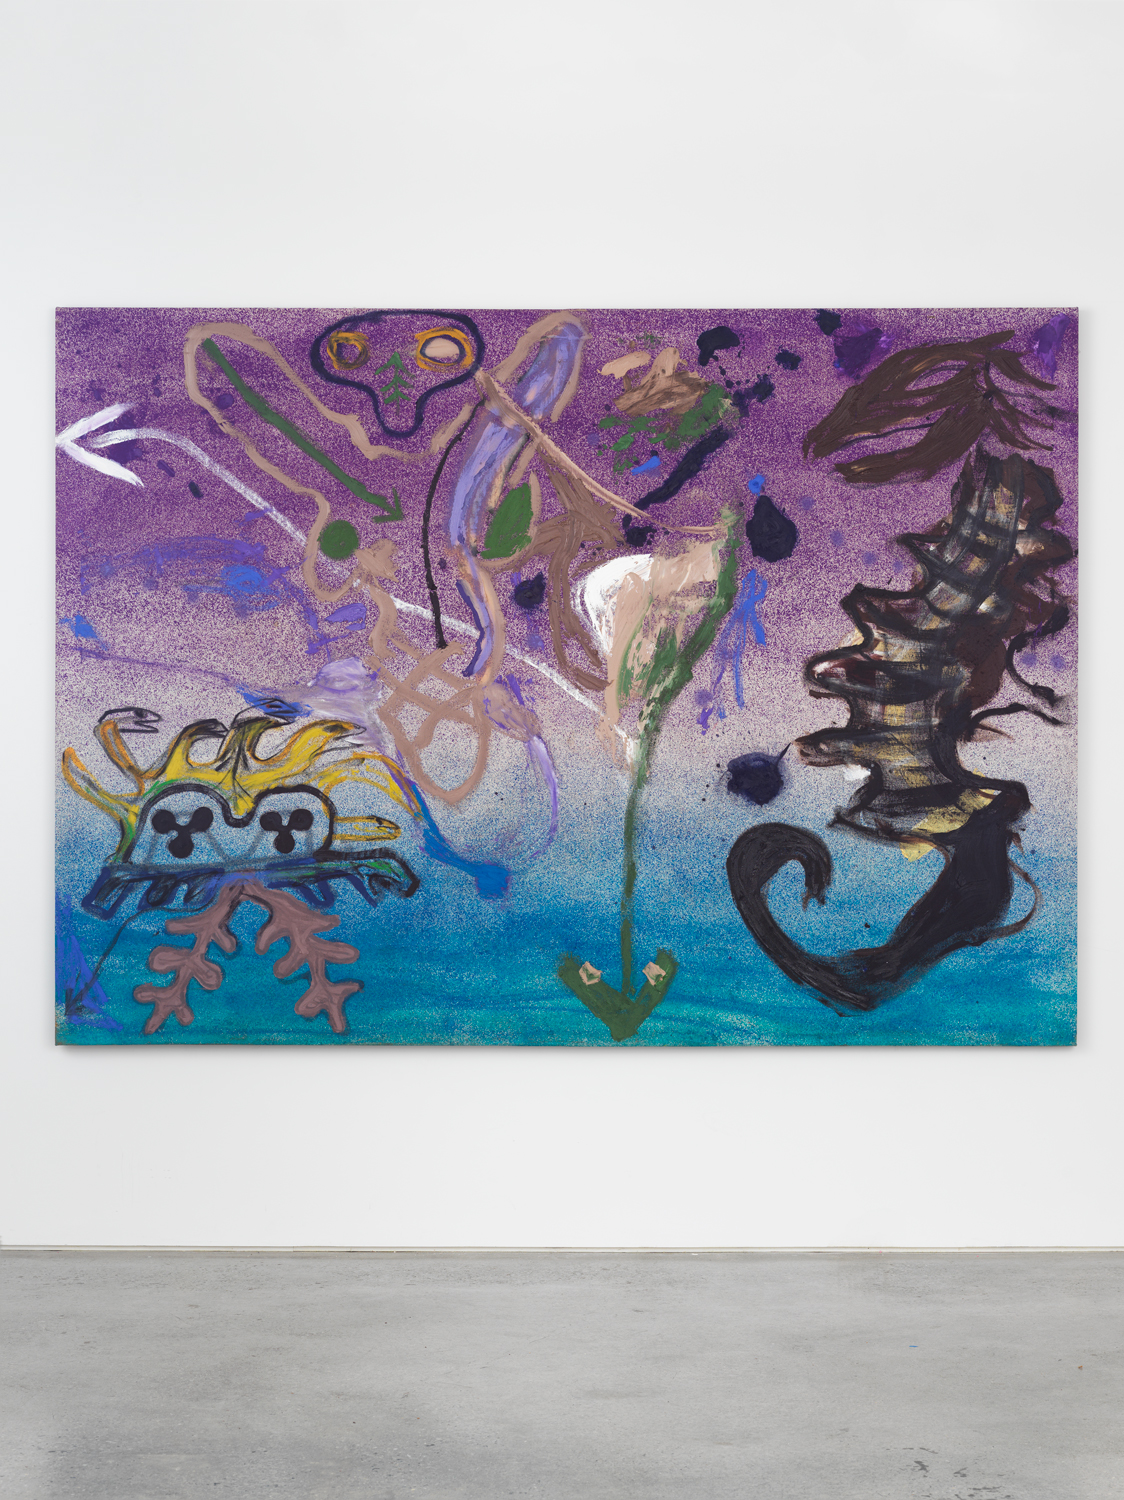 Bill Saylor, Cly-Fy, 2019, Oil, spray paint, and Flashe on canvas, 74h x 104w in.